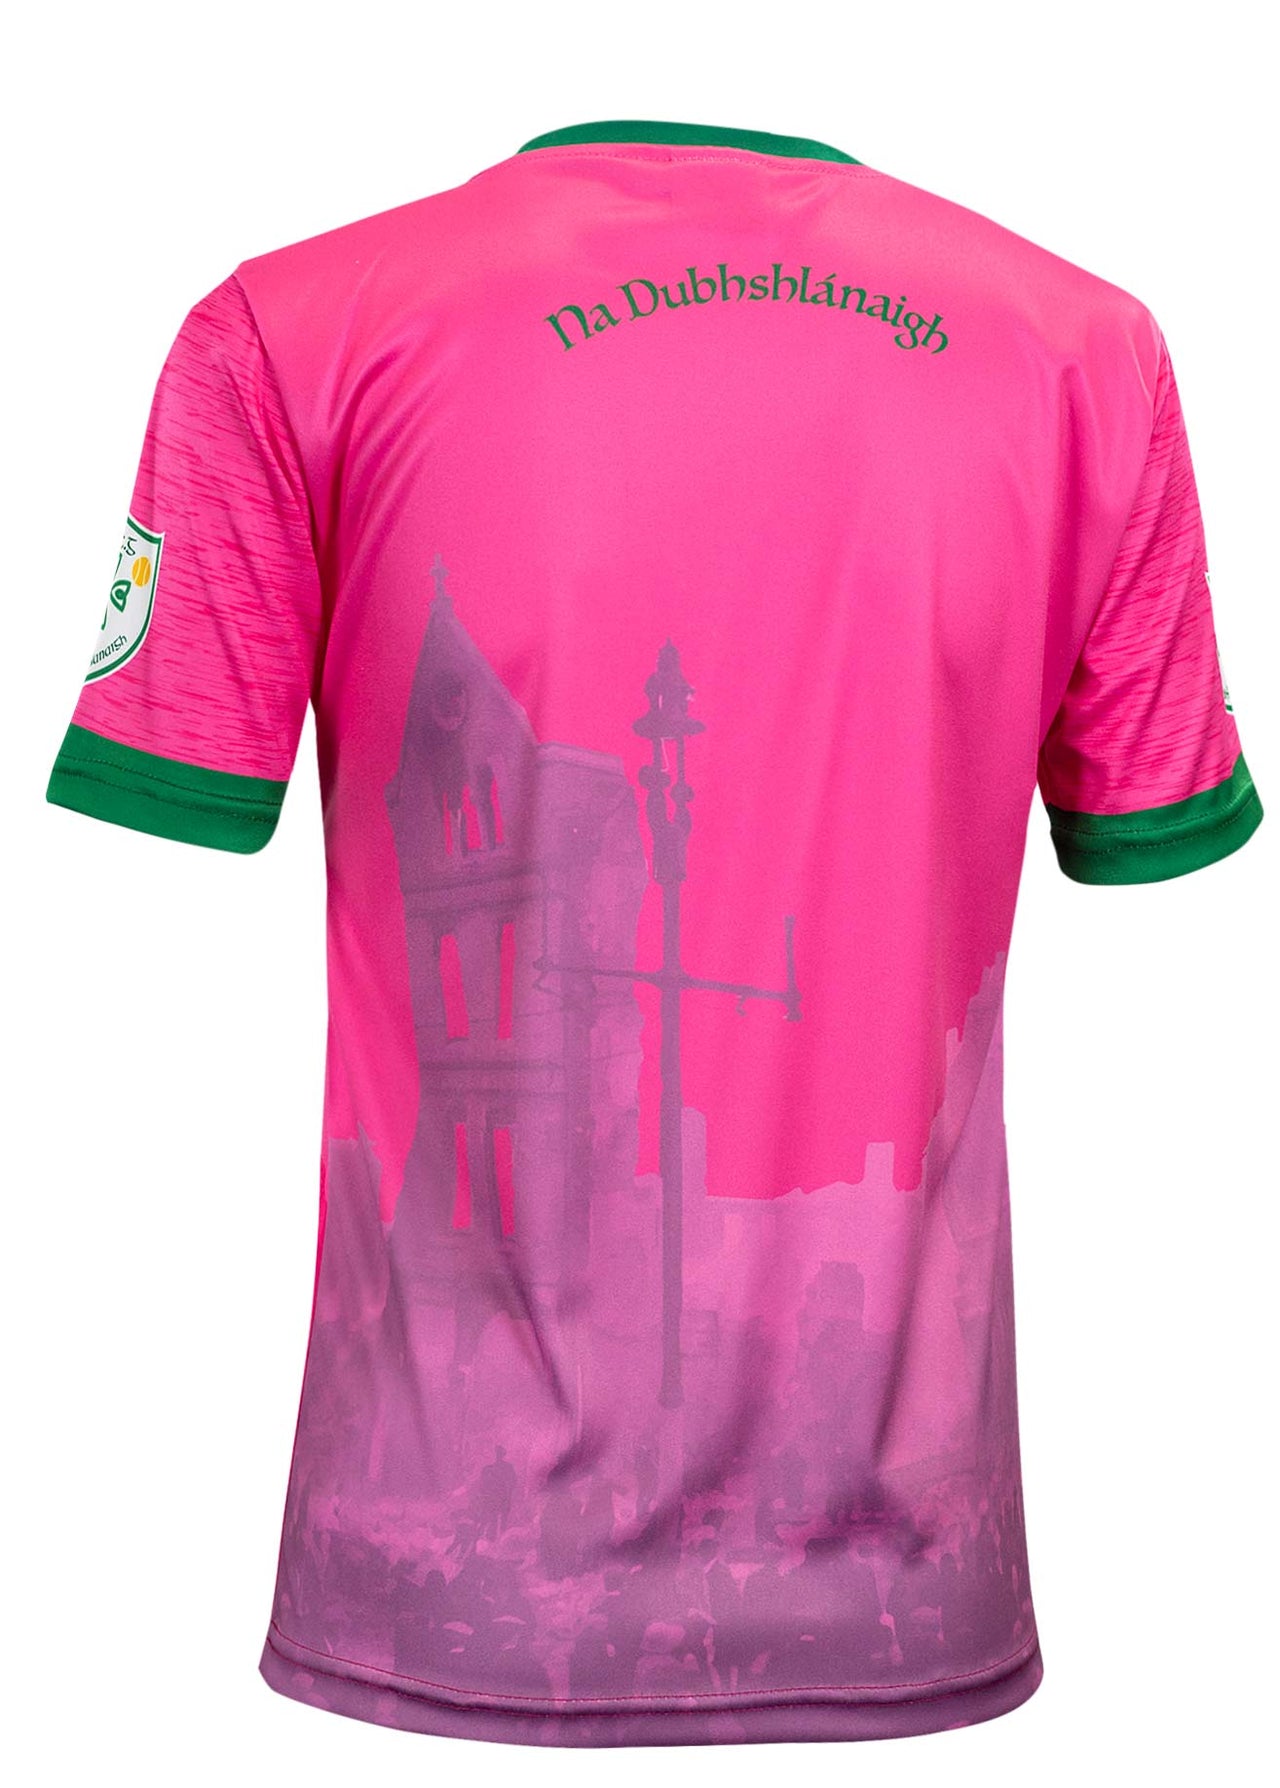 Delanys LGFA Pink Commemorative Jersey Player Fit Adult